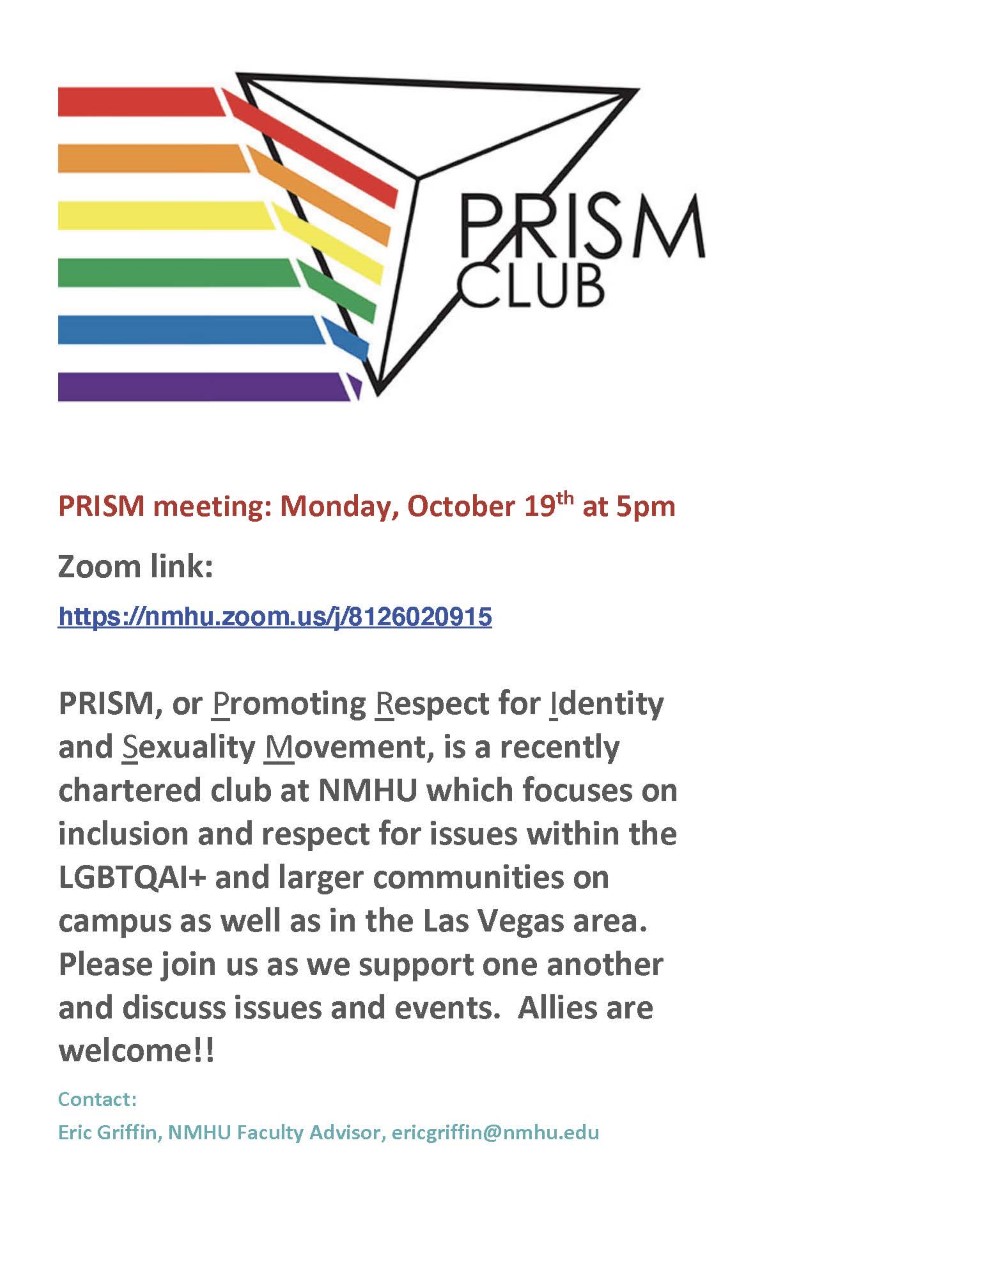 Flyer for PRISM meeting Oct. 19, 2020